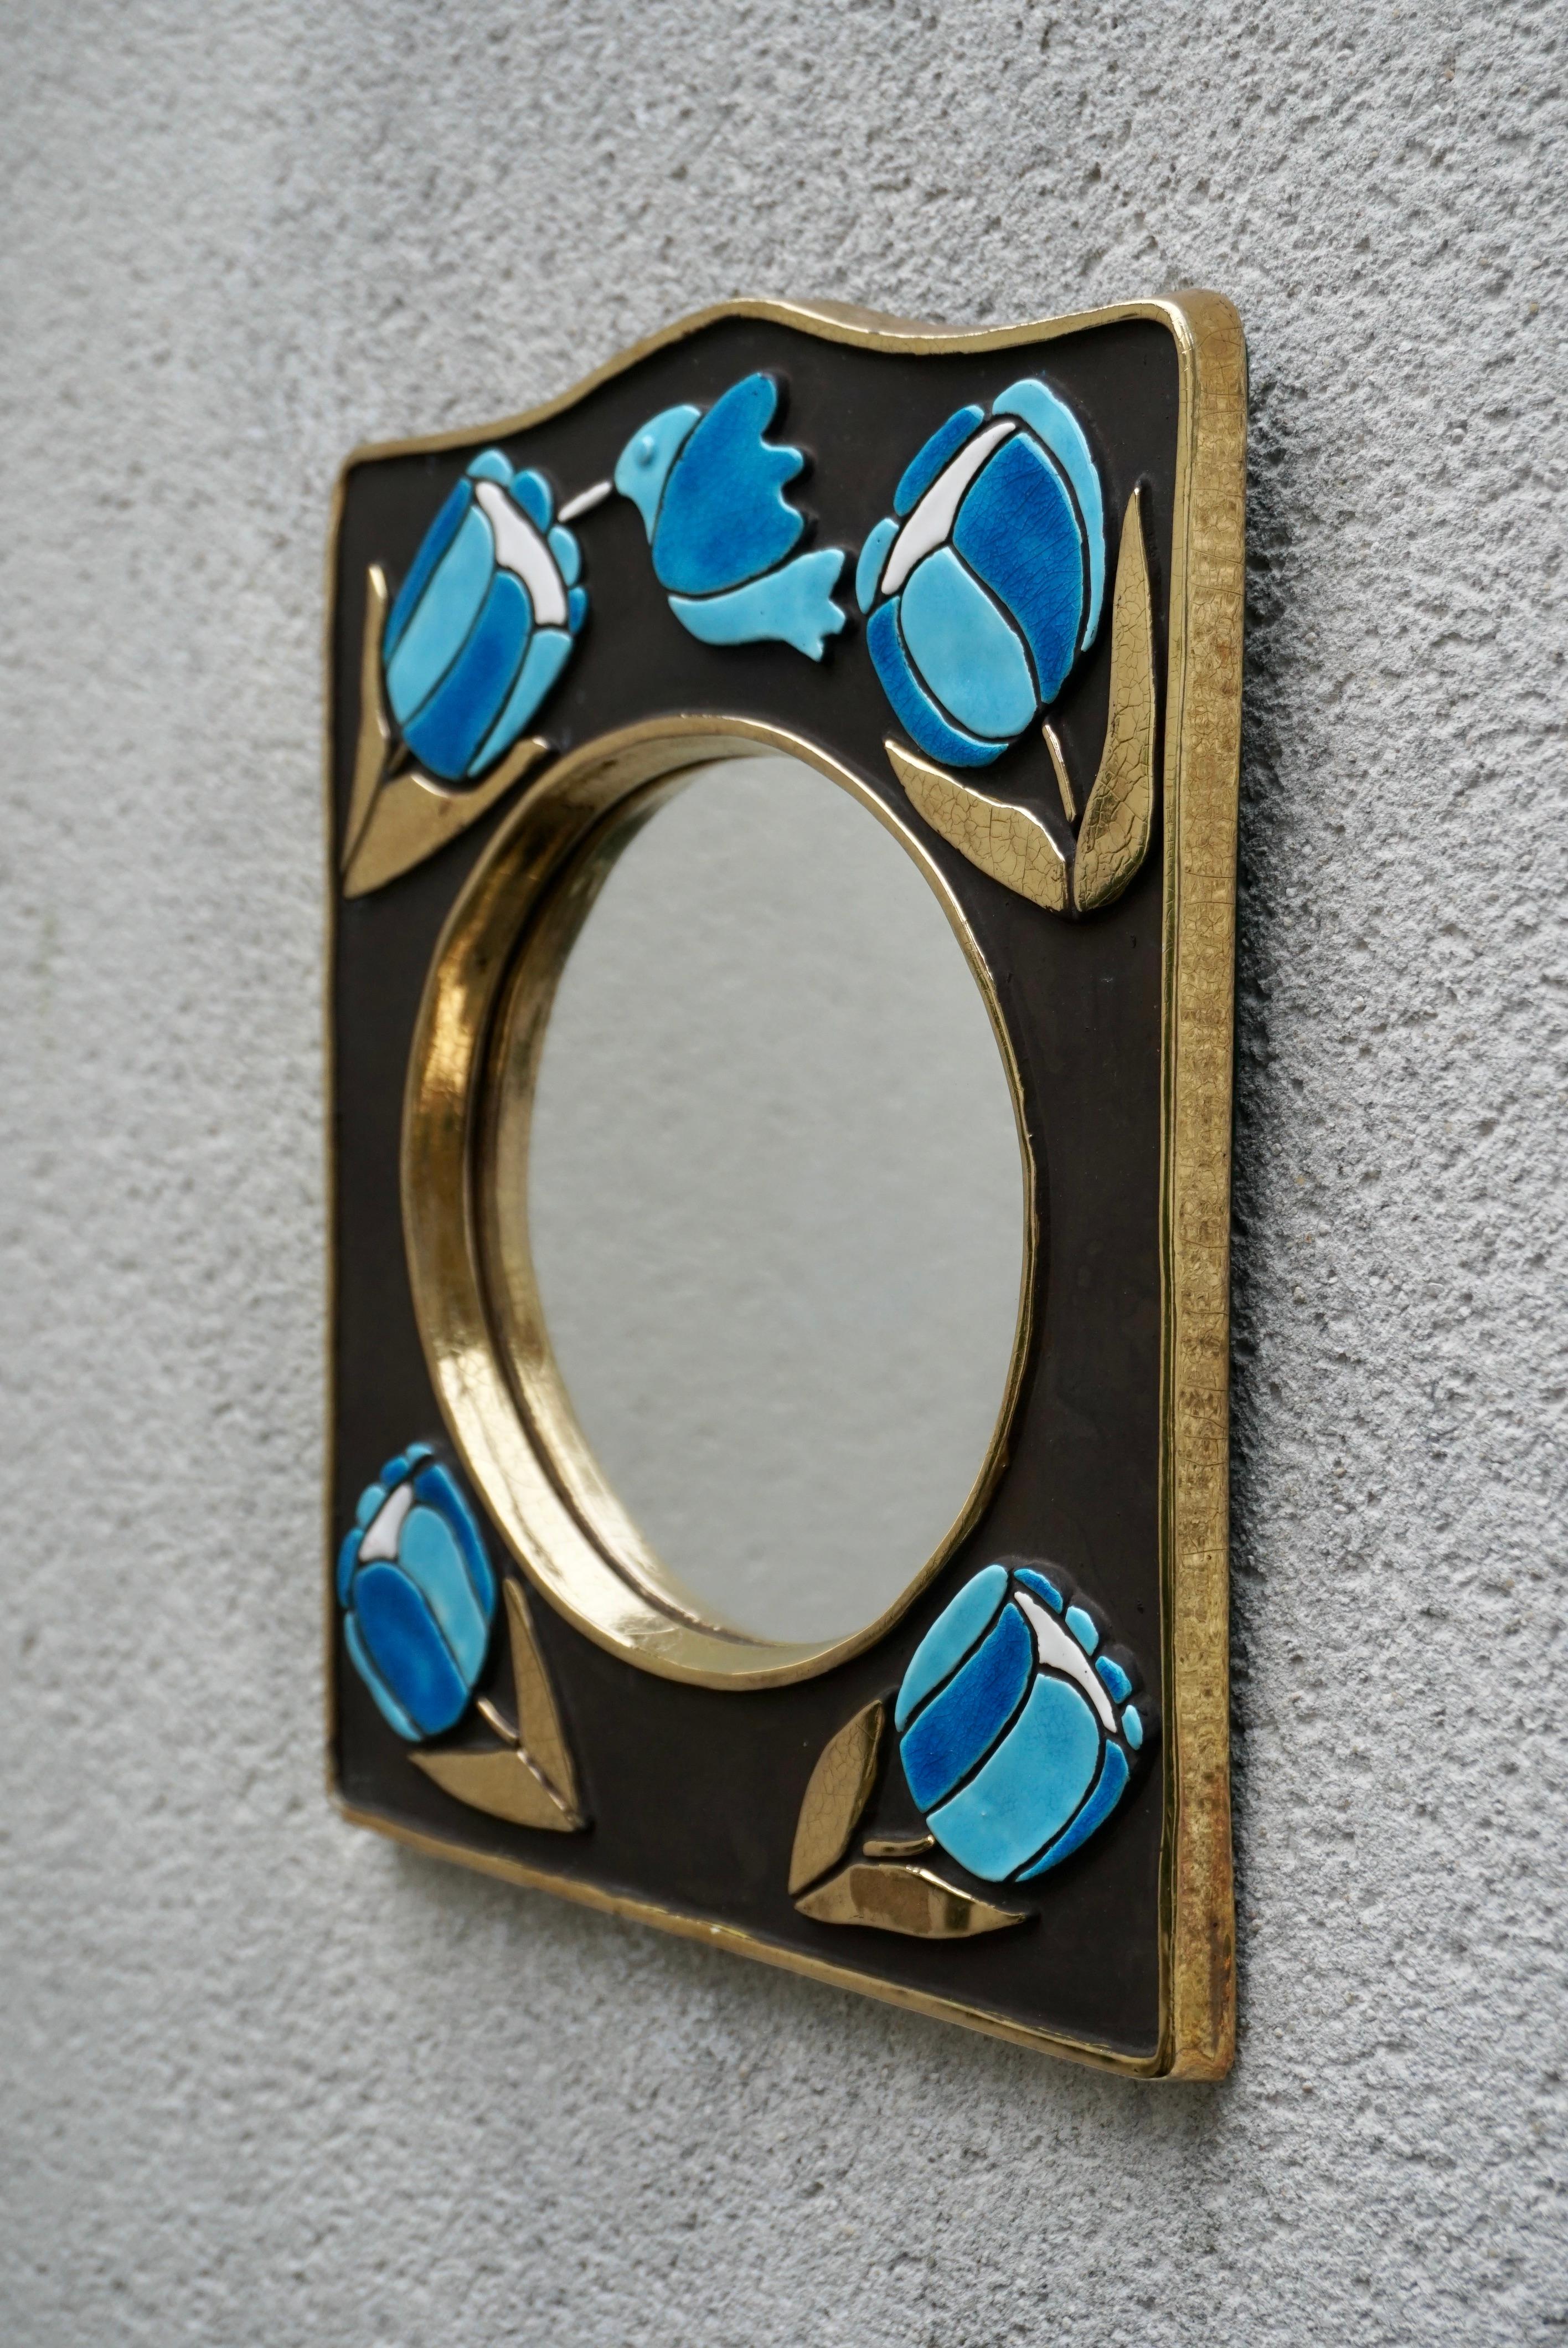 An exceptionally charming mirror in the style of  French ceramicist, Francois Lembo. 
Lembo loved to use birds , jewels and flowers in his designs. These beautiful bird with flowers are set within a gold outline, surrounded by a deep black